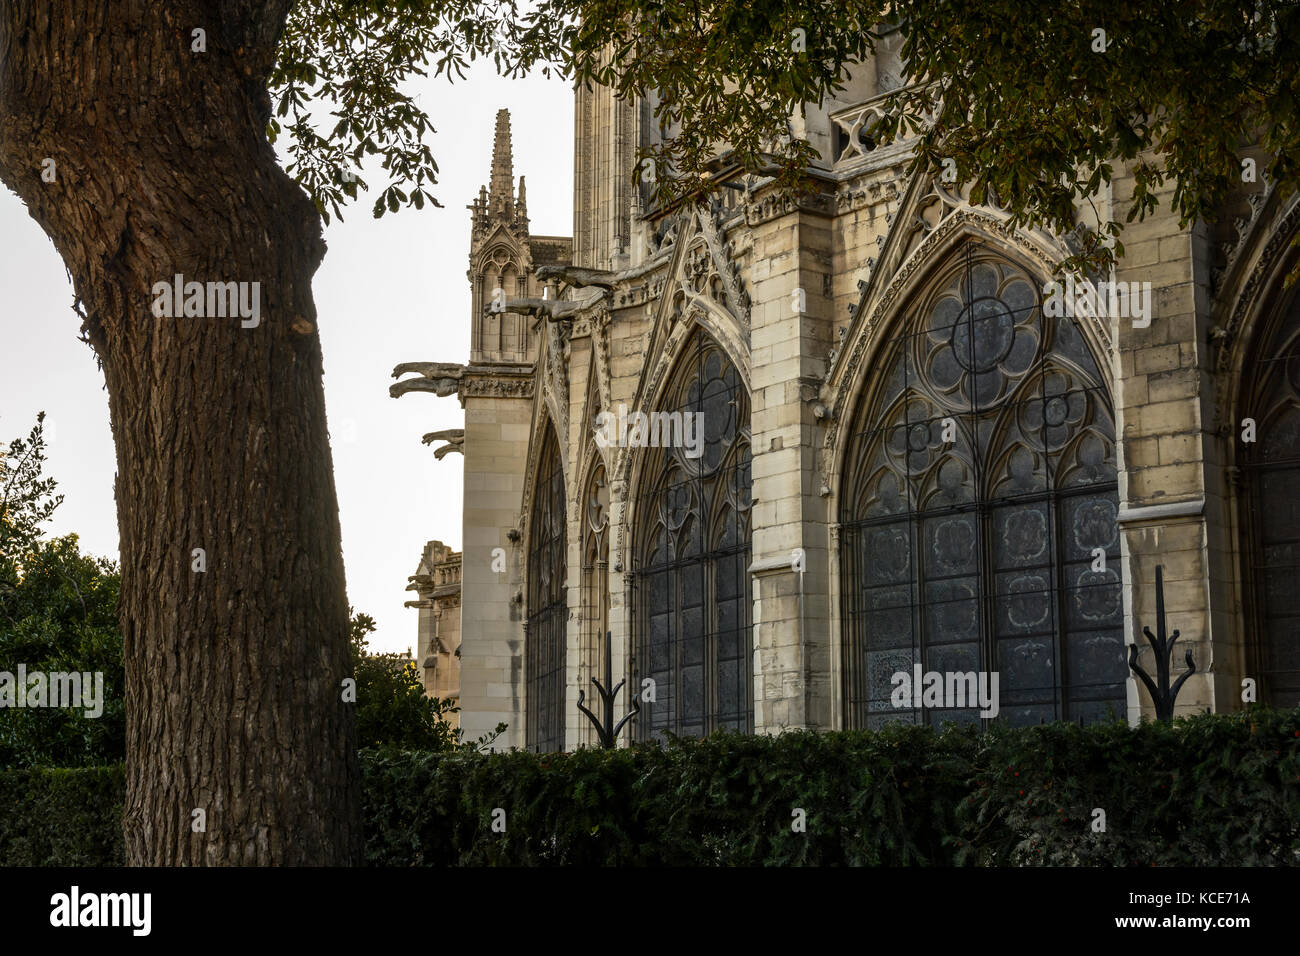 Detail view of the buttresses, pinnacles and gargoyles of the chancel of Notre-Dame de Paris cathedral at sunset. Stock Photo